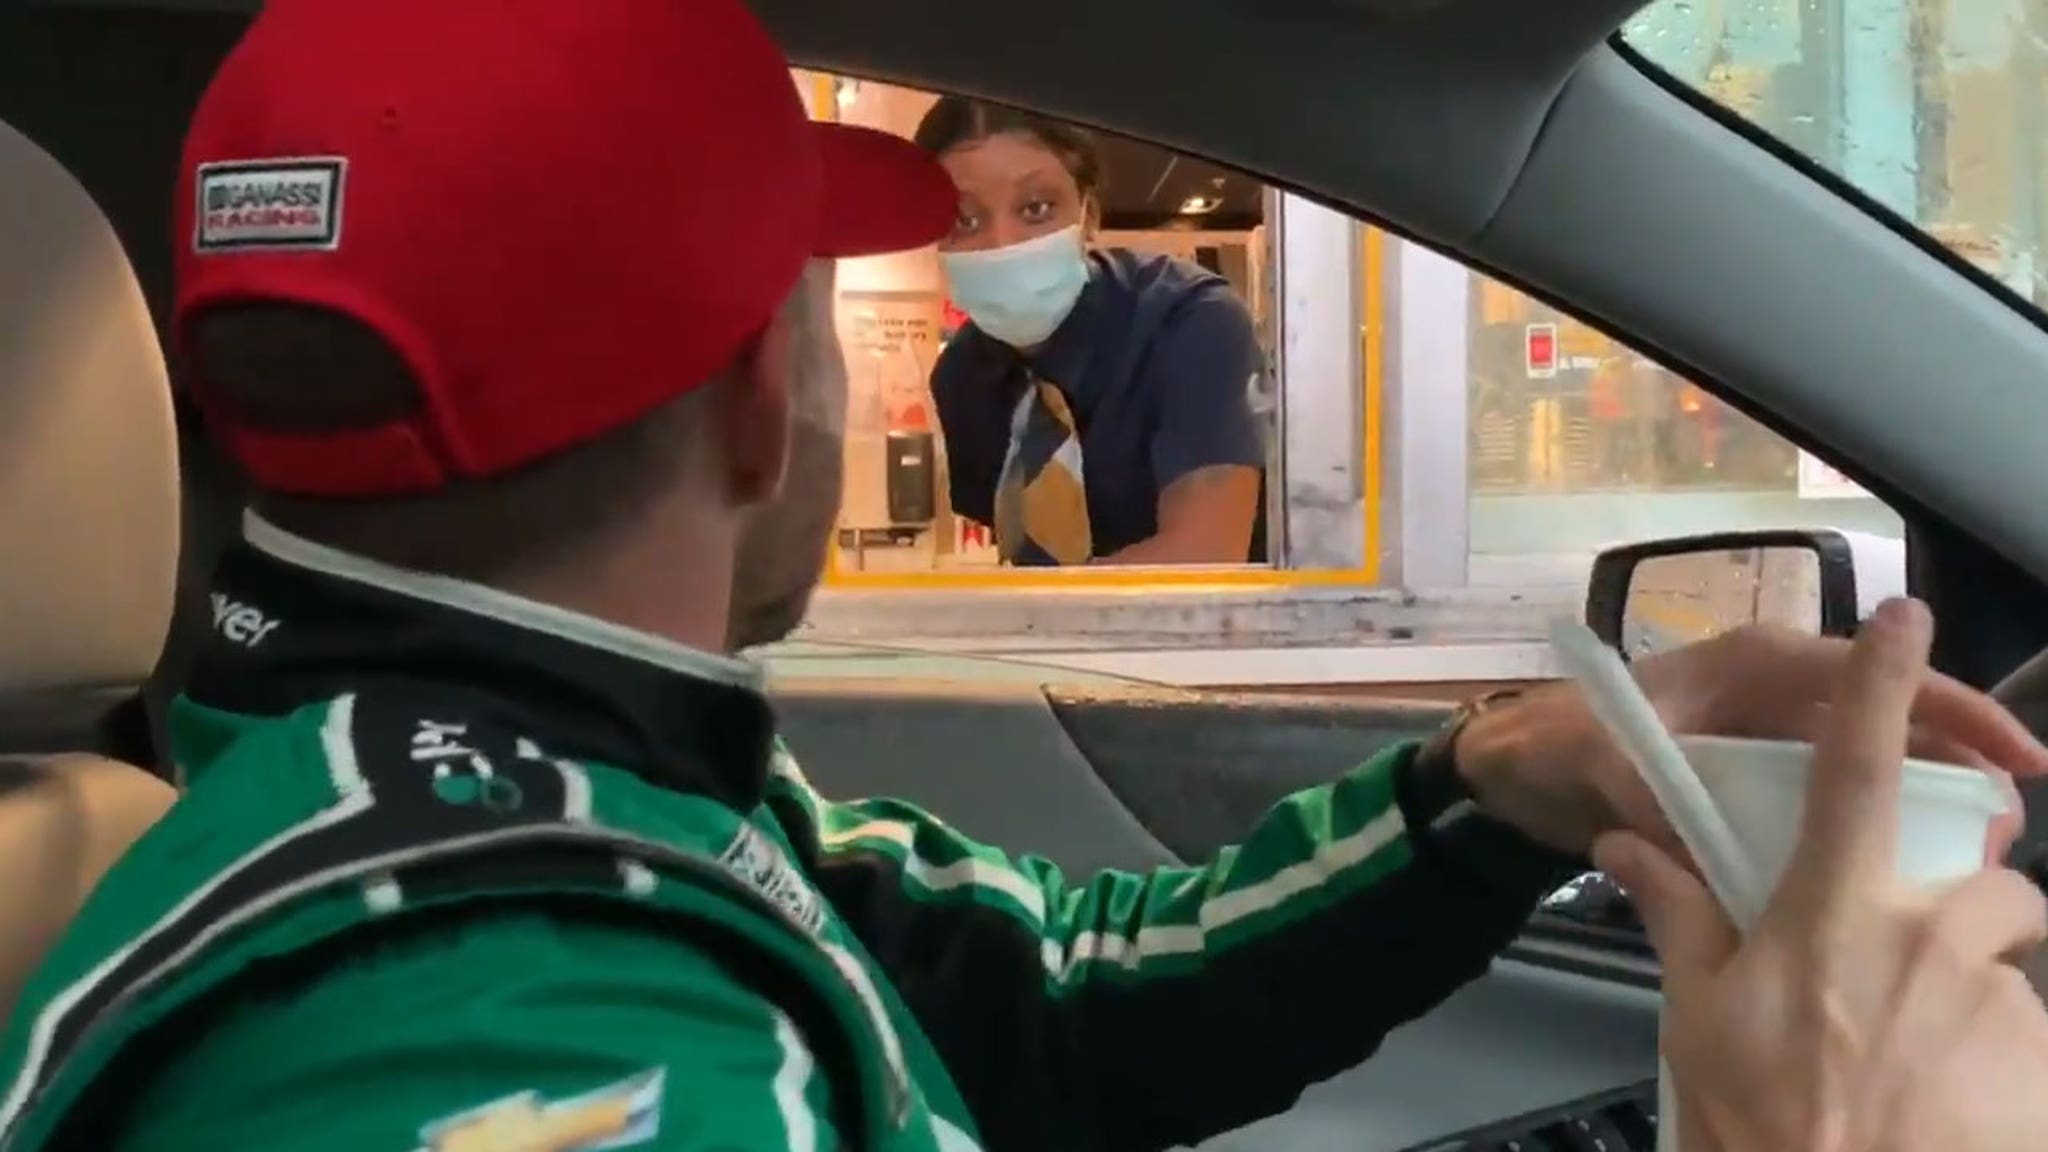 NASCAR driver Ross Chastain arrives at McDonald’s during the rain delay, the team is crazy!